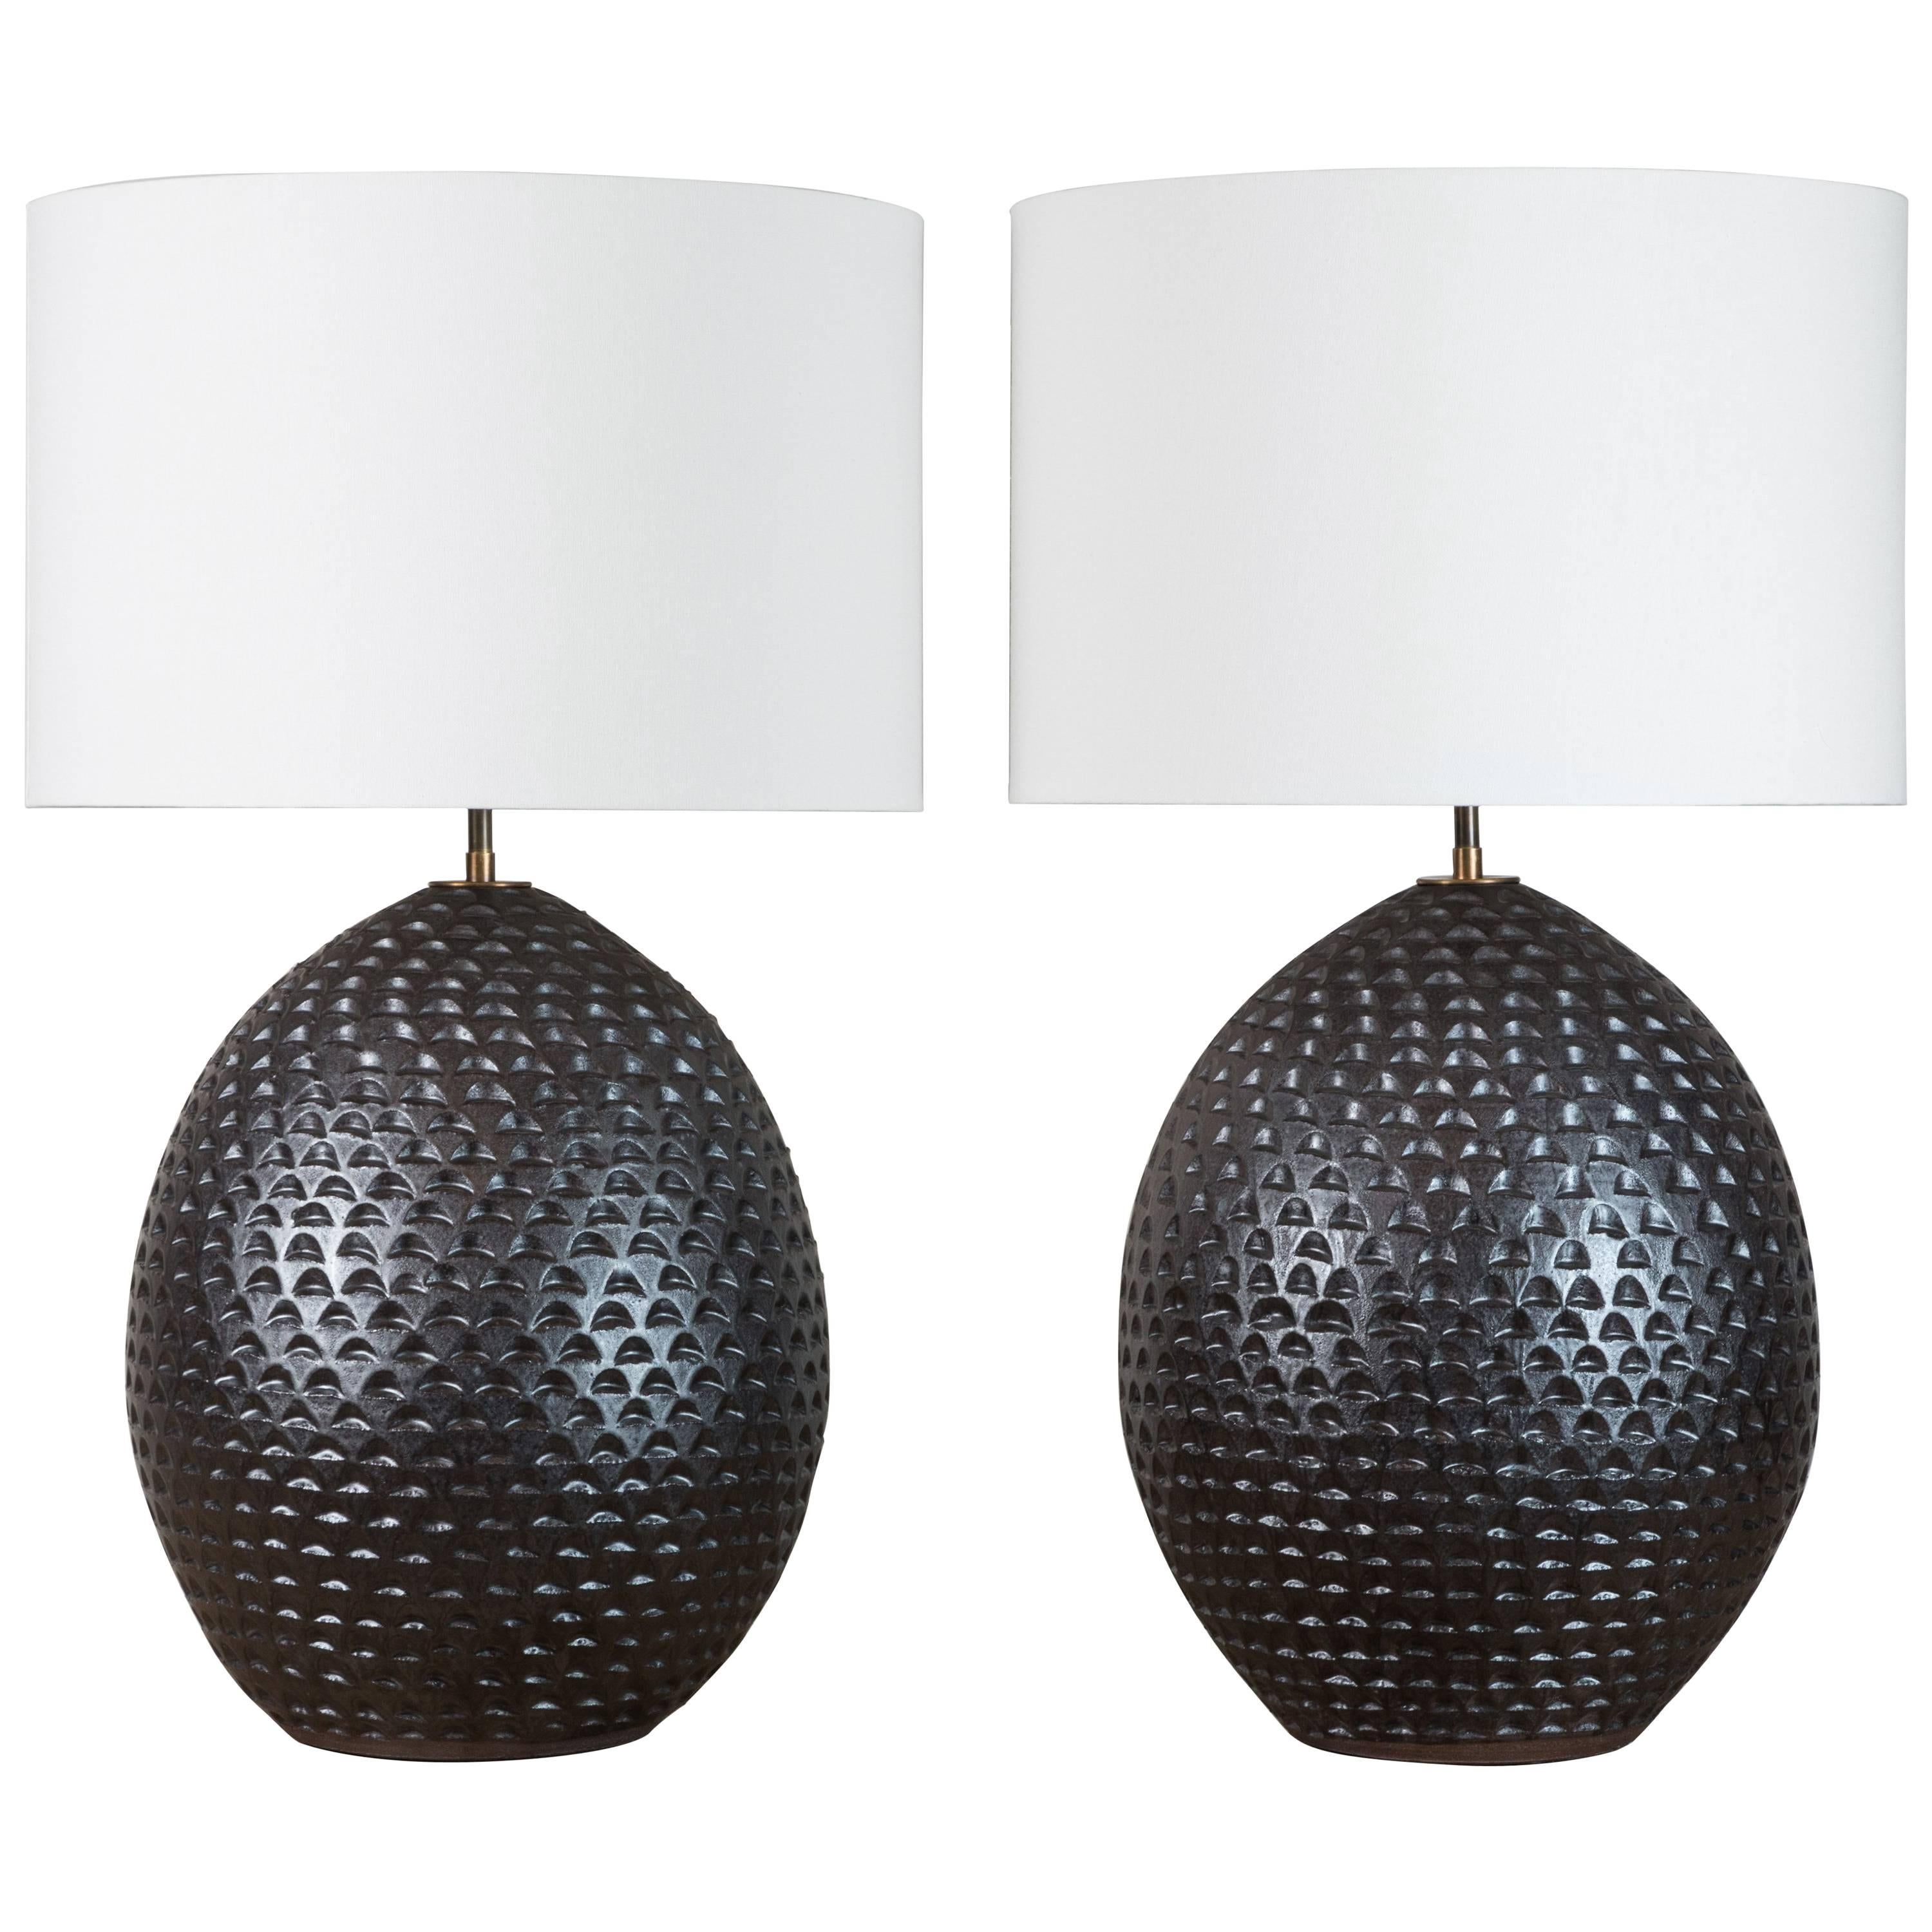 Pair of Large Ceramic Pod Lamps by Victoria Morris for Lawson-Fenning